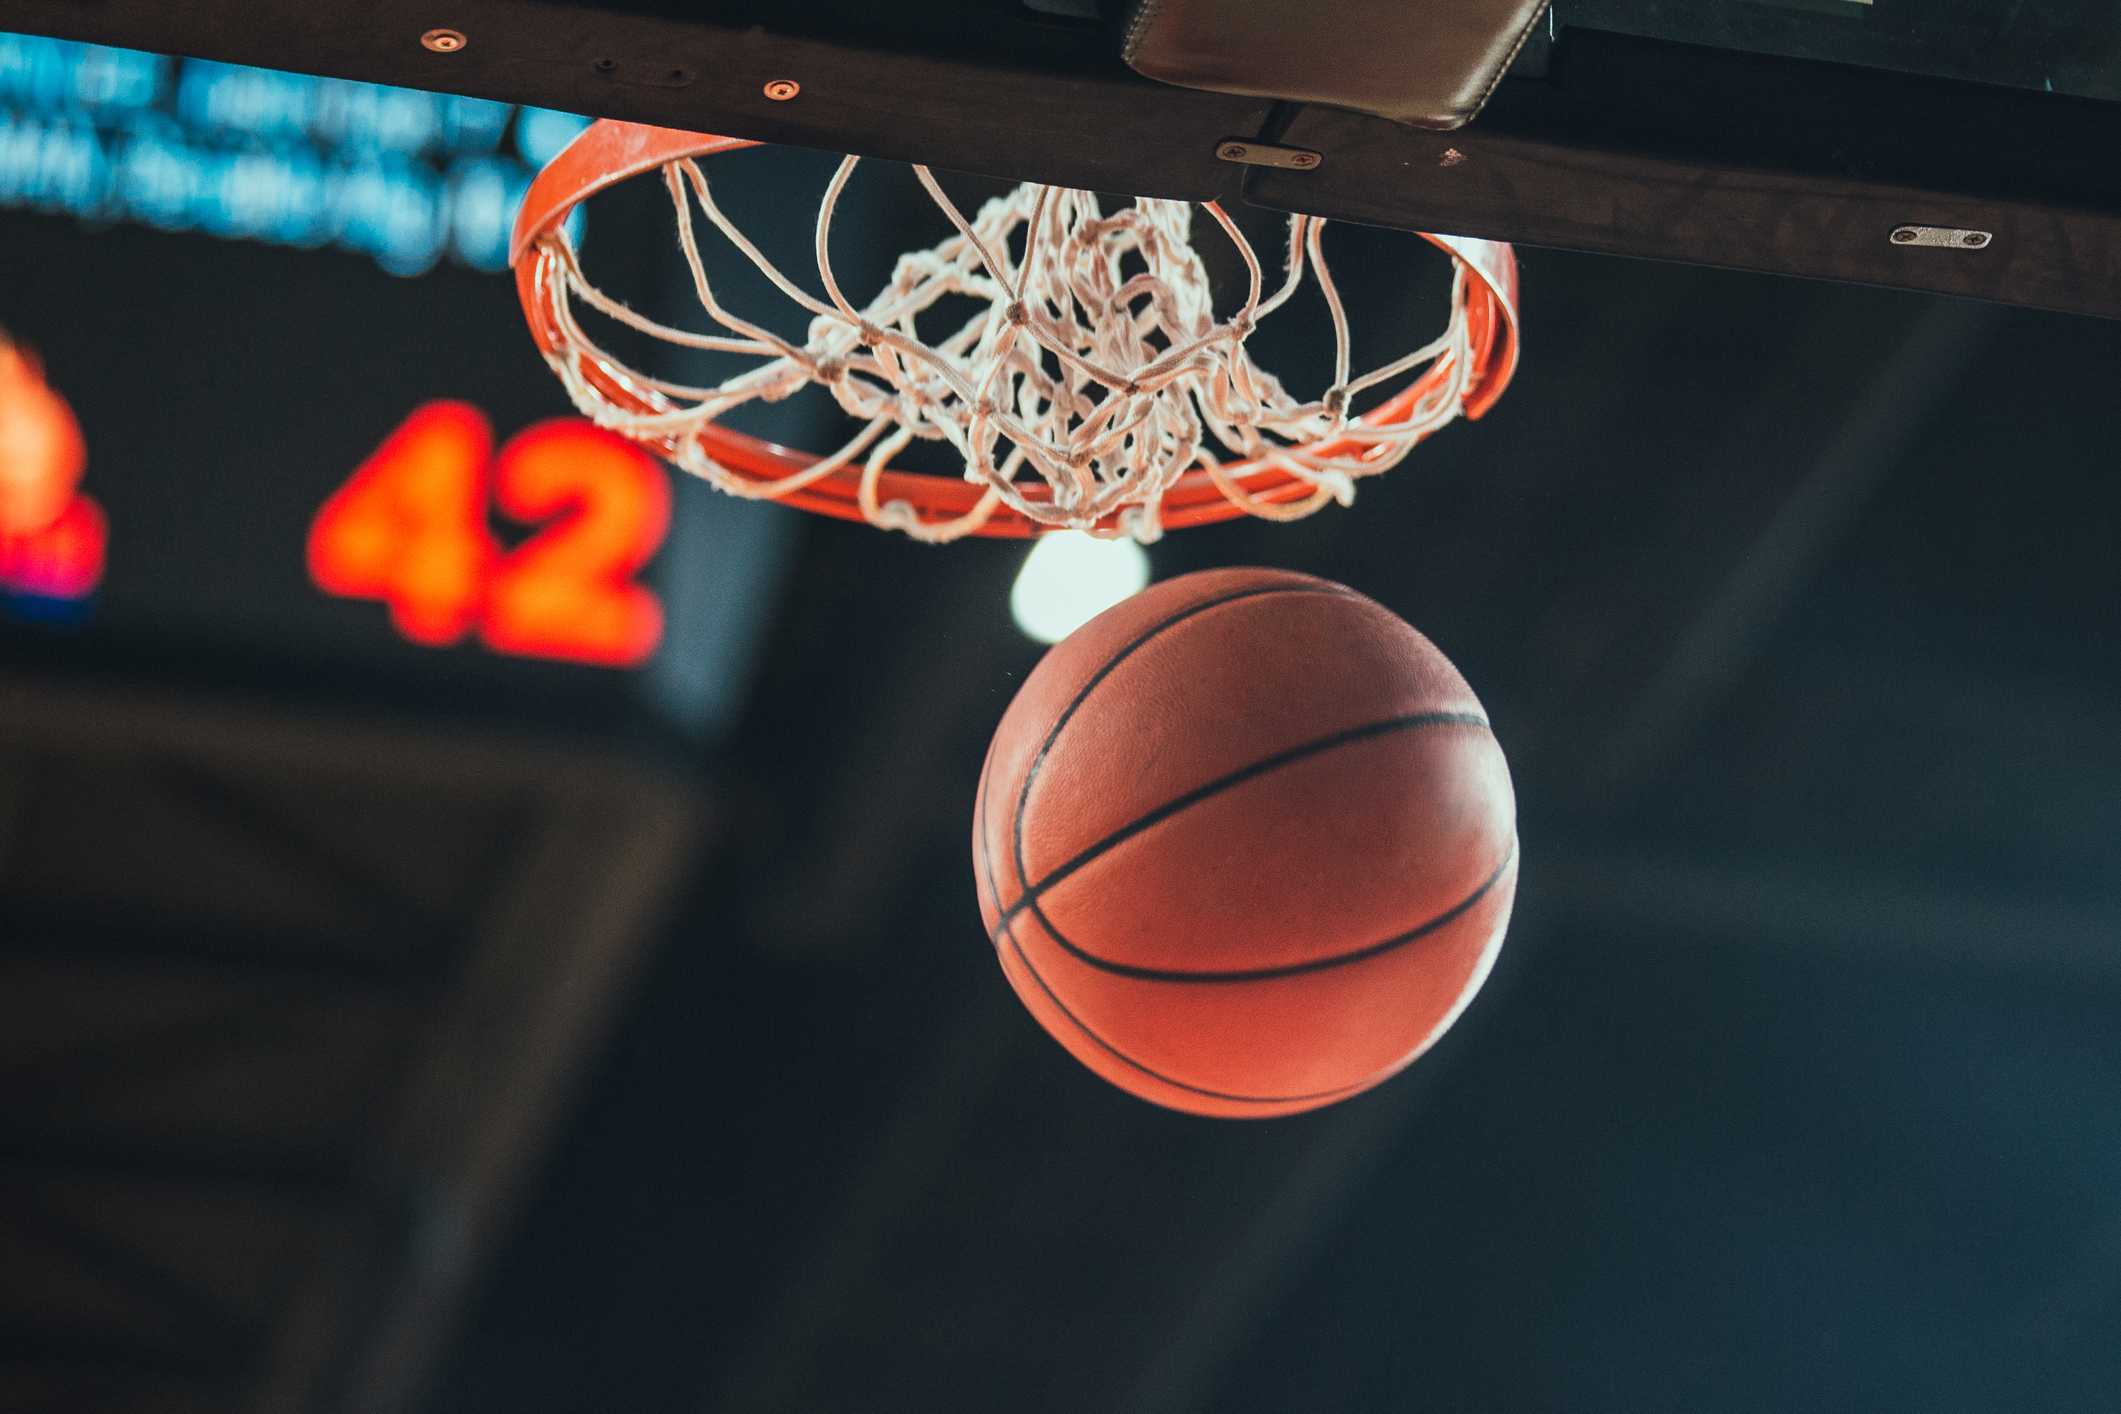 Basketball: Dare charges committee to develop game, organise domestic league